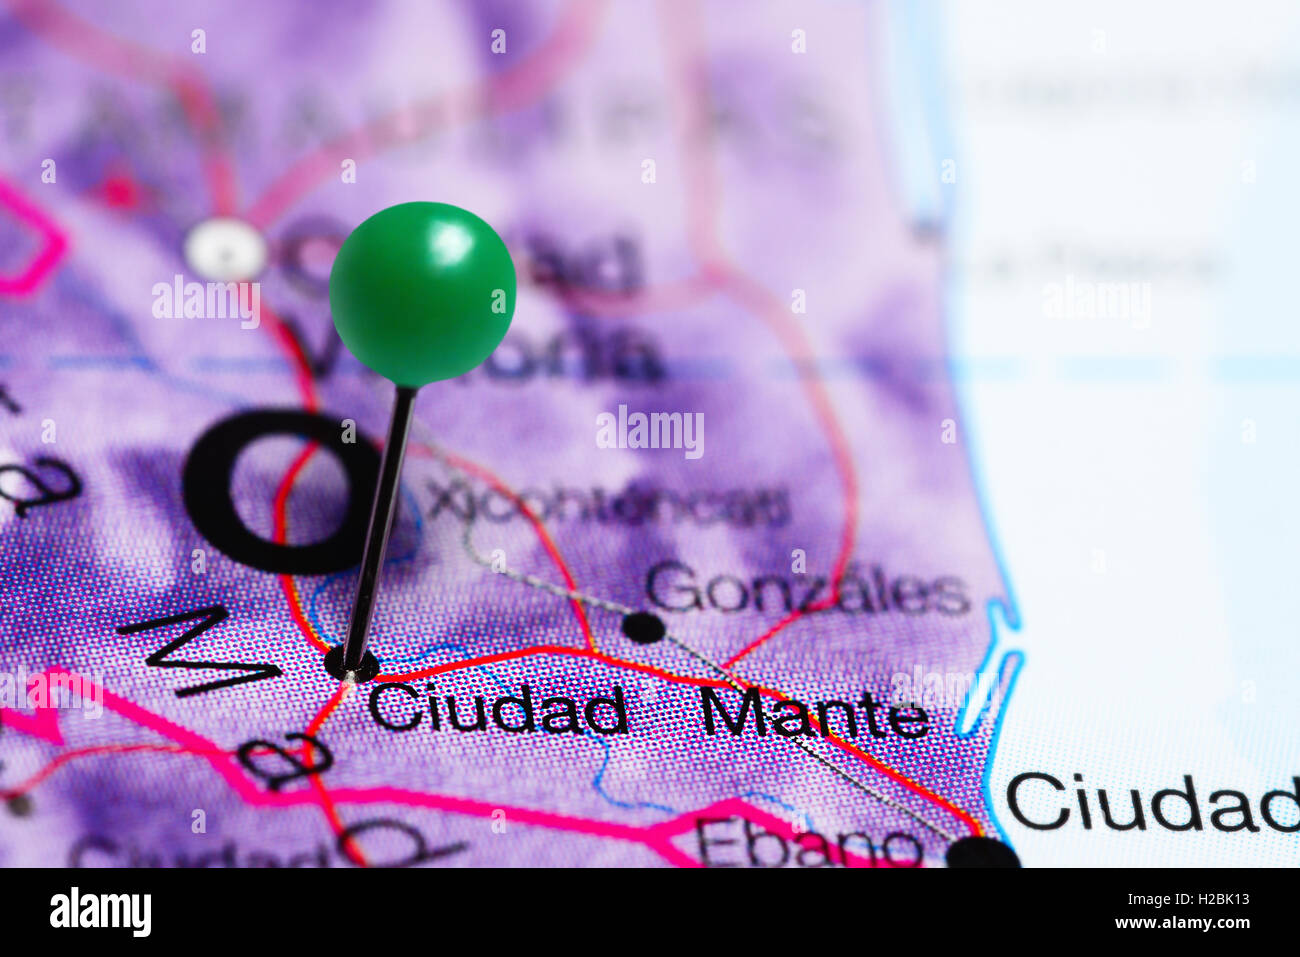 Ciudad Mante pinned on a map of Mexico Stock Photo